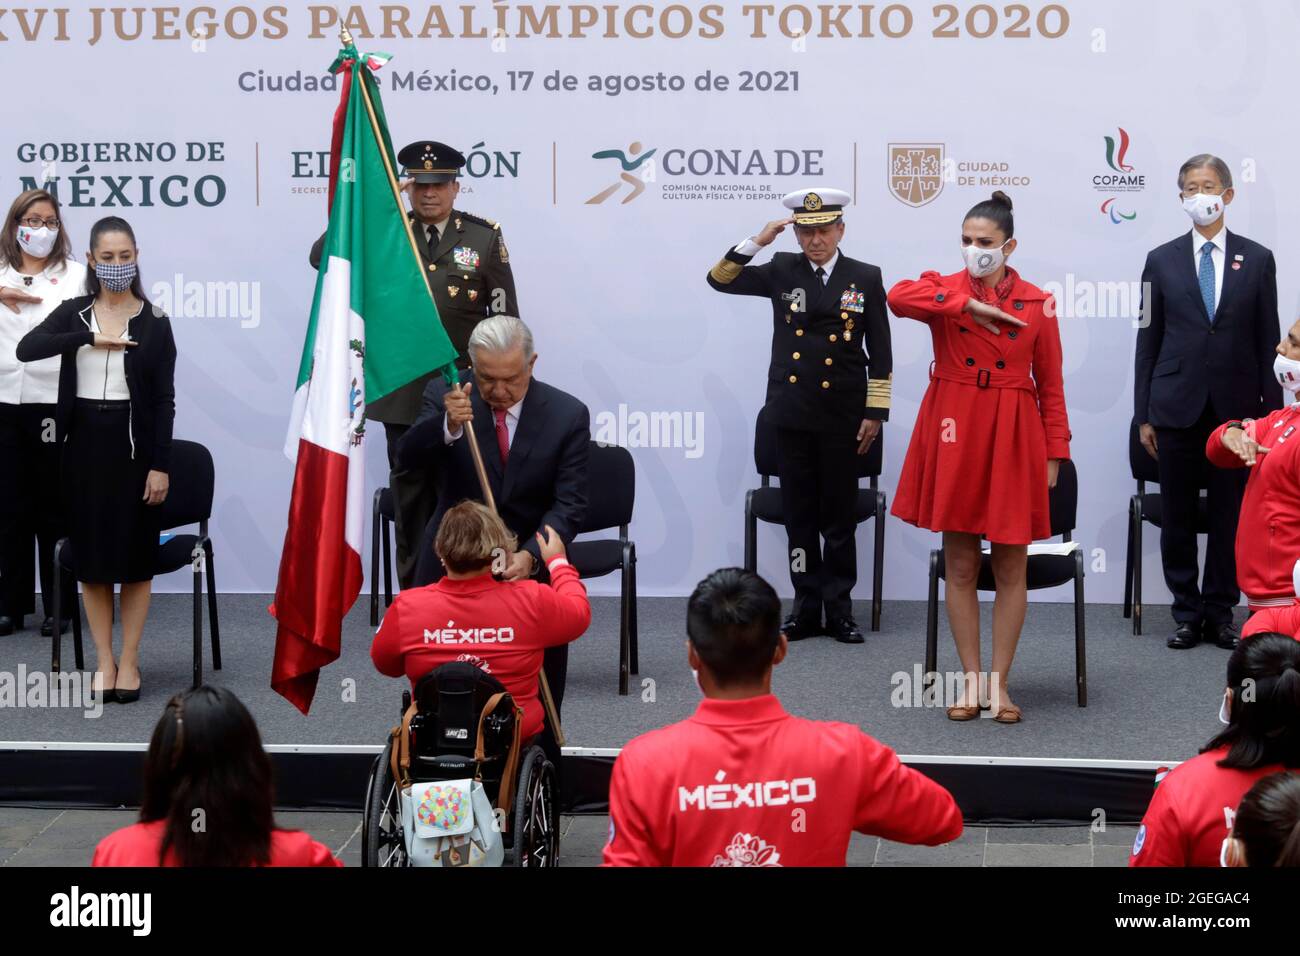 MEXICO CITY, MEXICO - AUGUST 17: Mexican President Andres Manuel Lopez Obrador, holds the nation's flag, accompanied by Mexico City Mayor Claudia Sheinbaum, Director of the National Commission for Physical Culture and Sport Ana Gabriela Guevara and ambassador of Japan in Mexico, Yasushi Takase during  a ceremony   with Mexico's athletes heading to the Tokyo 2020 Paralympic Games at National Palace on August 17, 2021 in Mexico City, Mexico. Credit: Luis Barron/Eyepix Group/The Photo Access Stock Photo